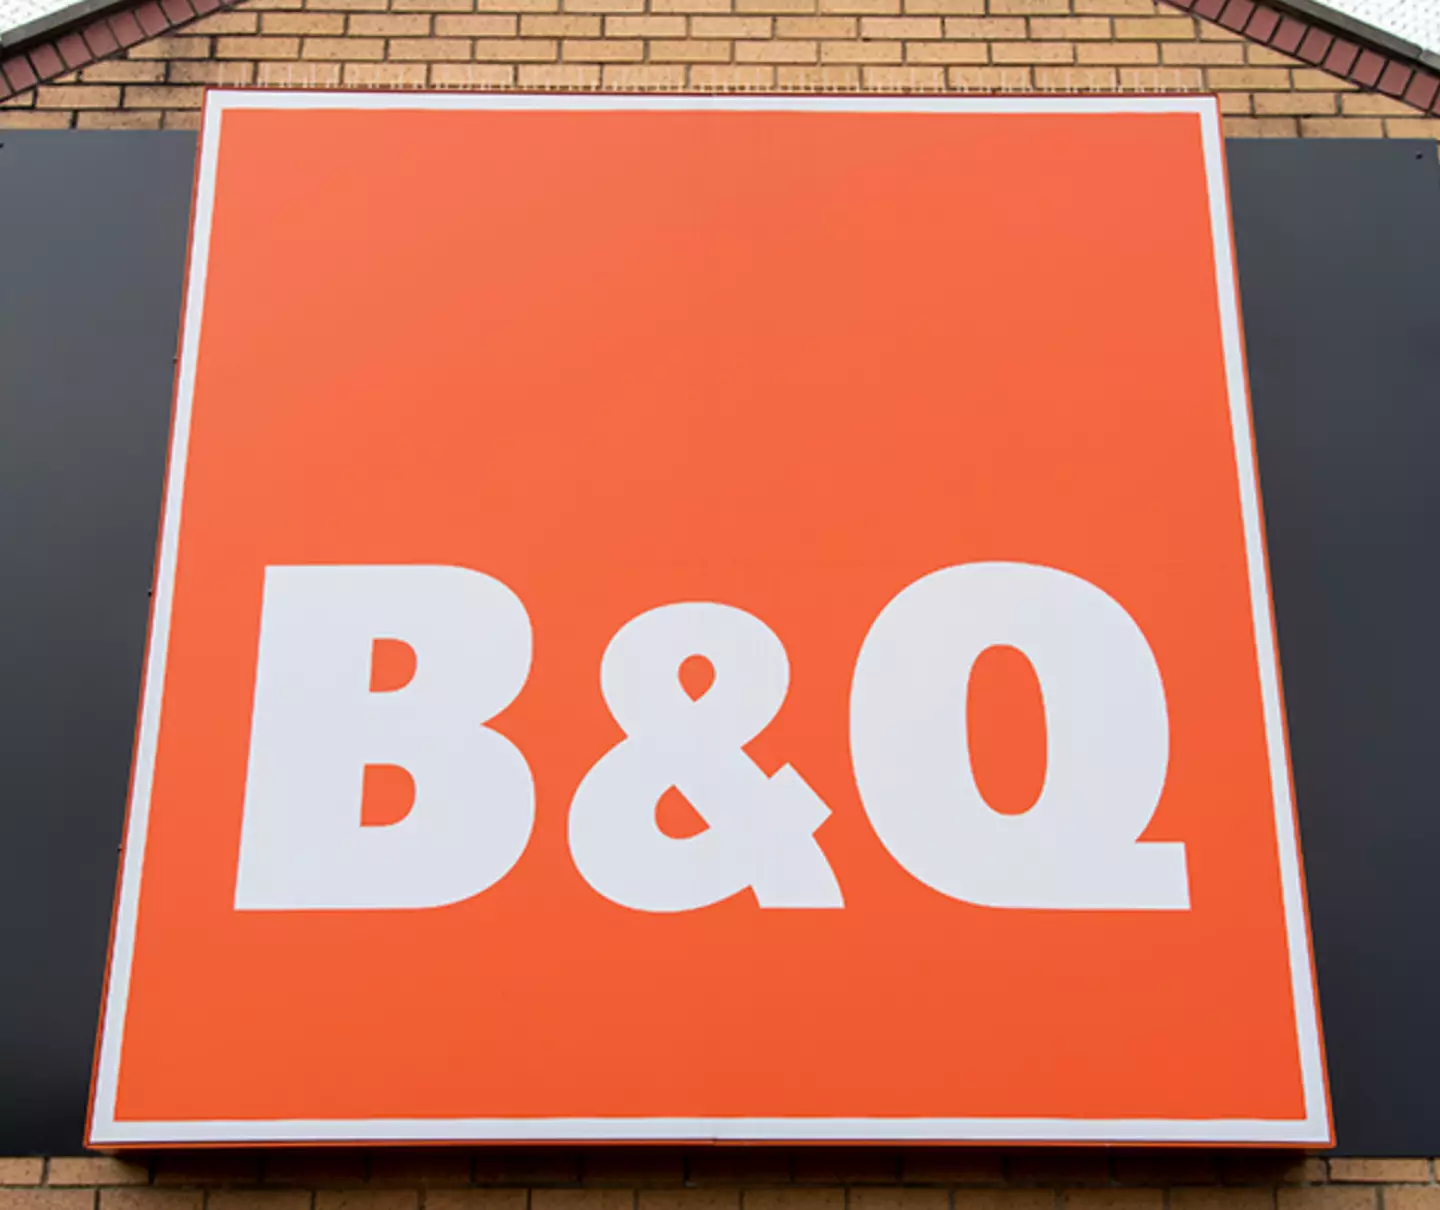 Tracy Ellis was caught after spending £37.80 at B&Q.